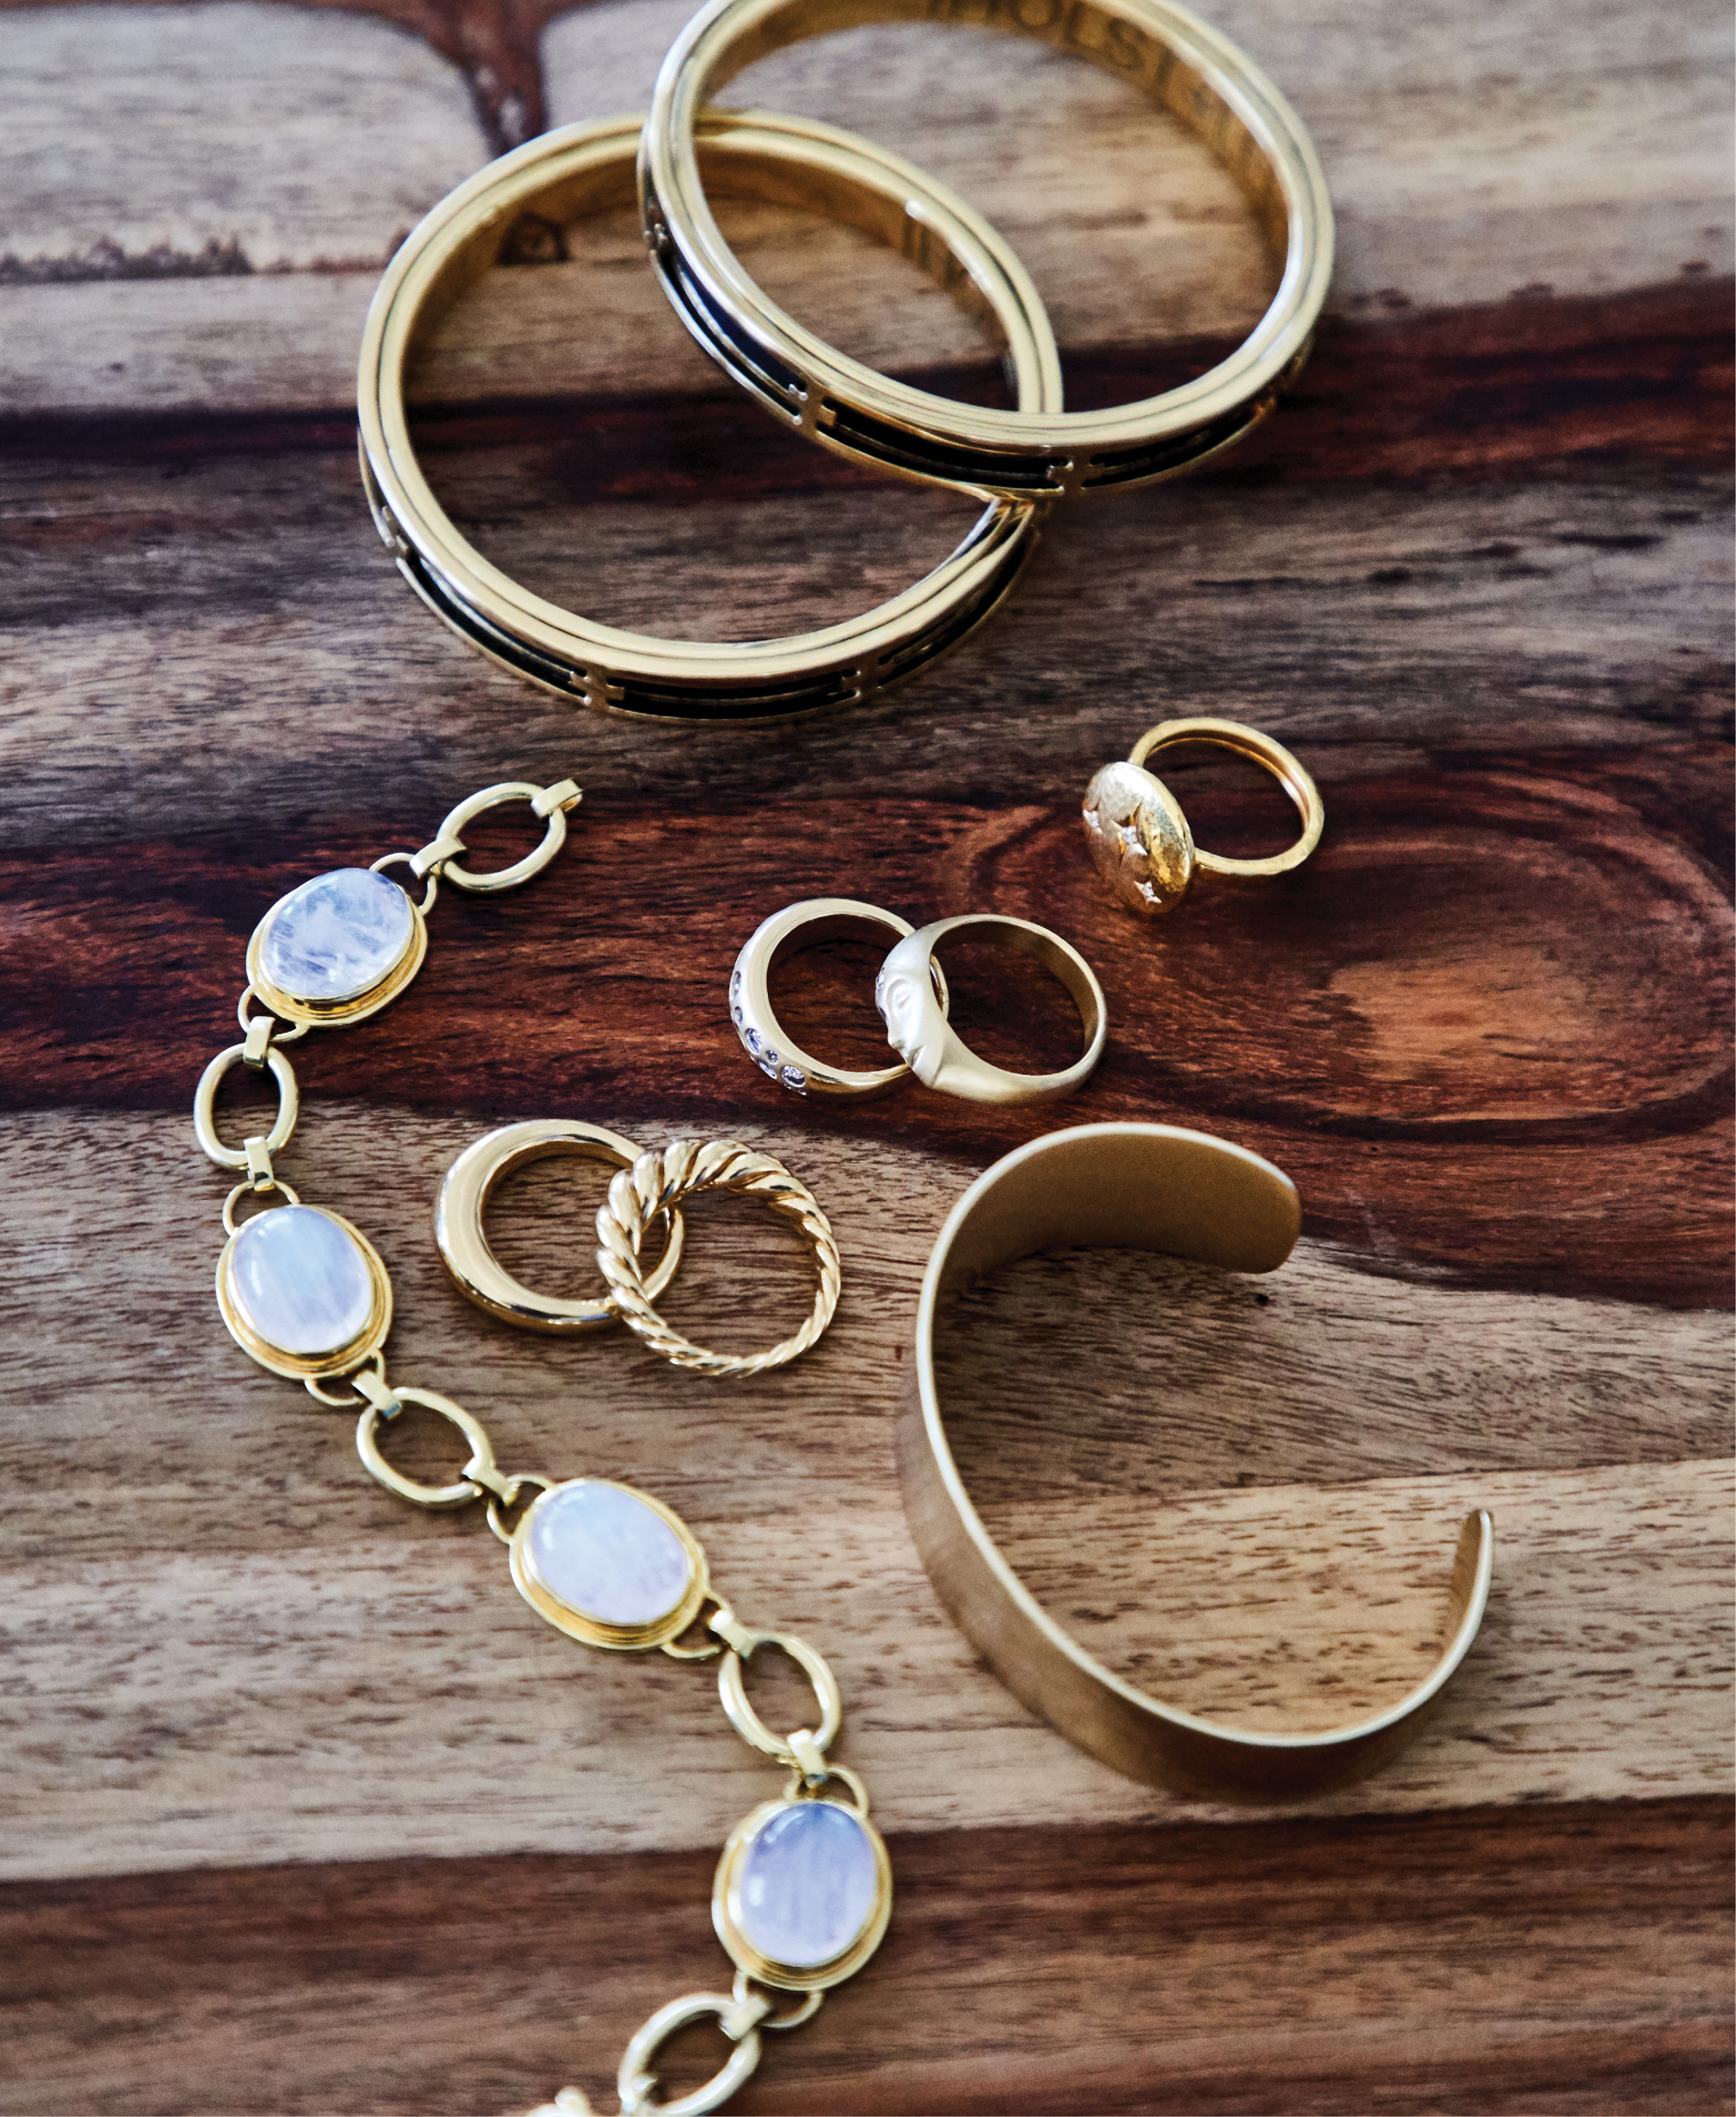 FOUND TREASURES - (Top to bottom) Holst + Lee signature bangle in “black,” $90 each at Out of Hand; Gurhan “Starlight” gold and diamond ring, $2,950 at Gwynn’s of Mount Pleasant; Anthony Lent 18K gold and diamond ring, price upon request at RTW; 18K gold and round brilliant-cut diamond ring, $2,397 at Sandler’s Diamonds &amp; Time; David Yurman 18K gold “Pure Form” stack rings, $1,900 at REEDS Jewelers; Kendra Scott 14K gold-plate “Tenley cuff,” $95 at Kendra Scott; Mazza Company 14K gold and moonstone bracelet, $4,600 at Croghan’s Jewel Box